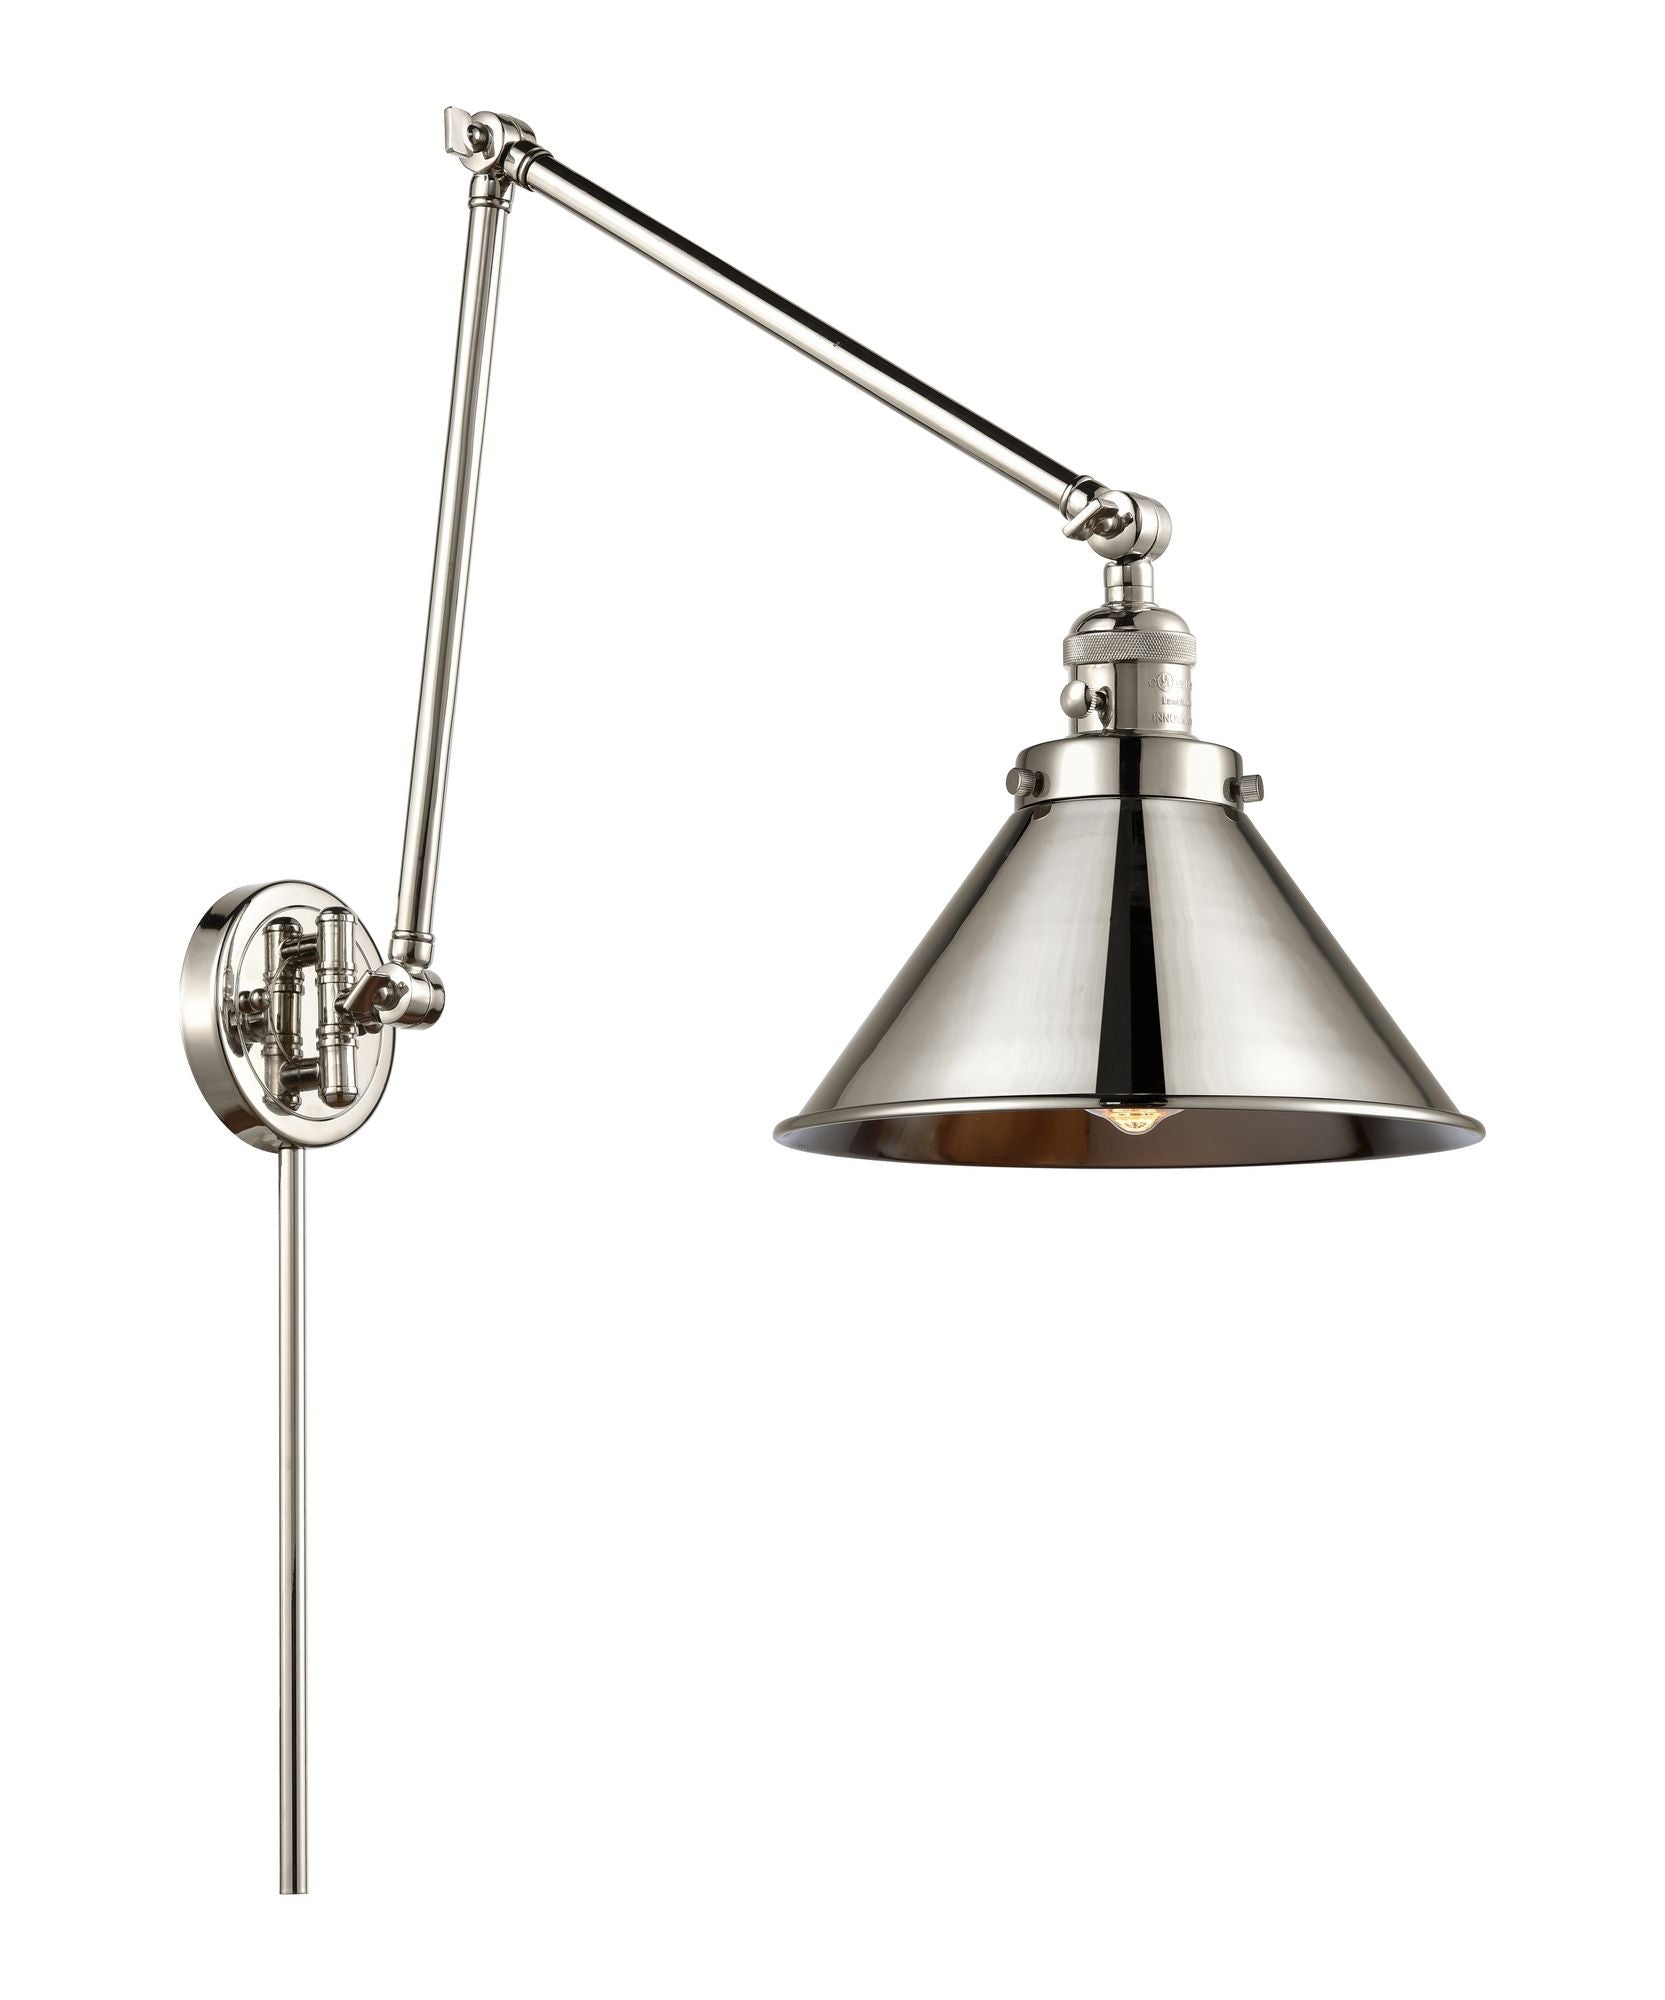 1-Light 10" Polished Nickel Swing Arm - Polished Nickel Briarcliff Shade - Incandesent Or LED Bulbs